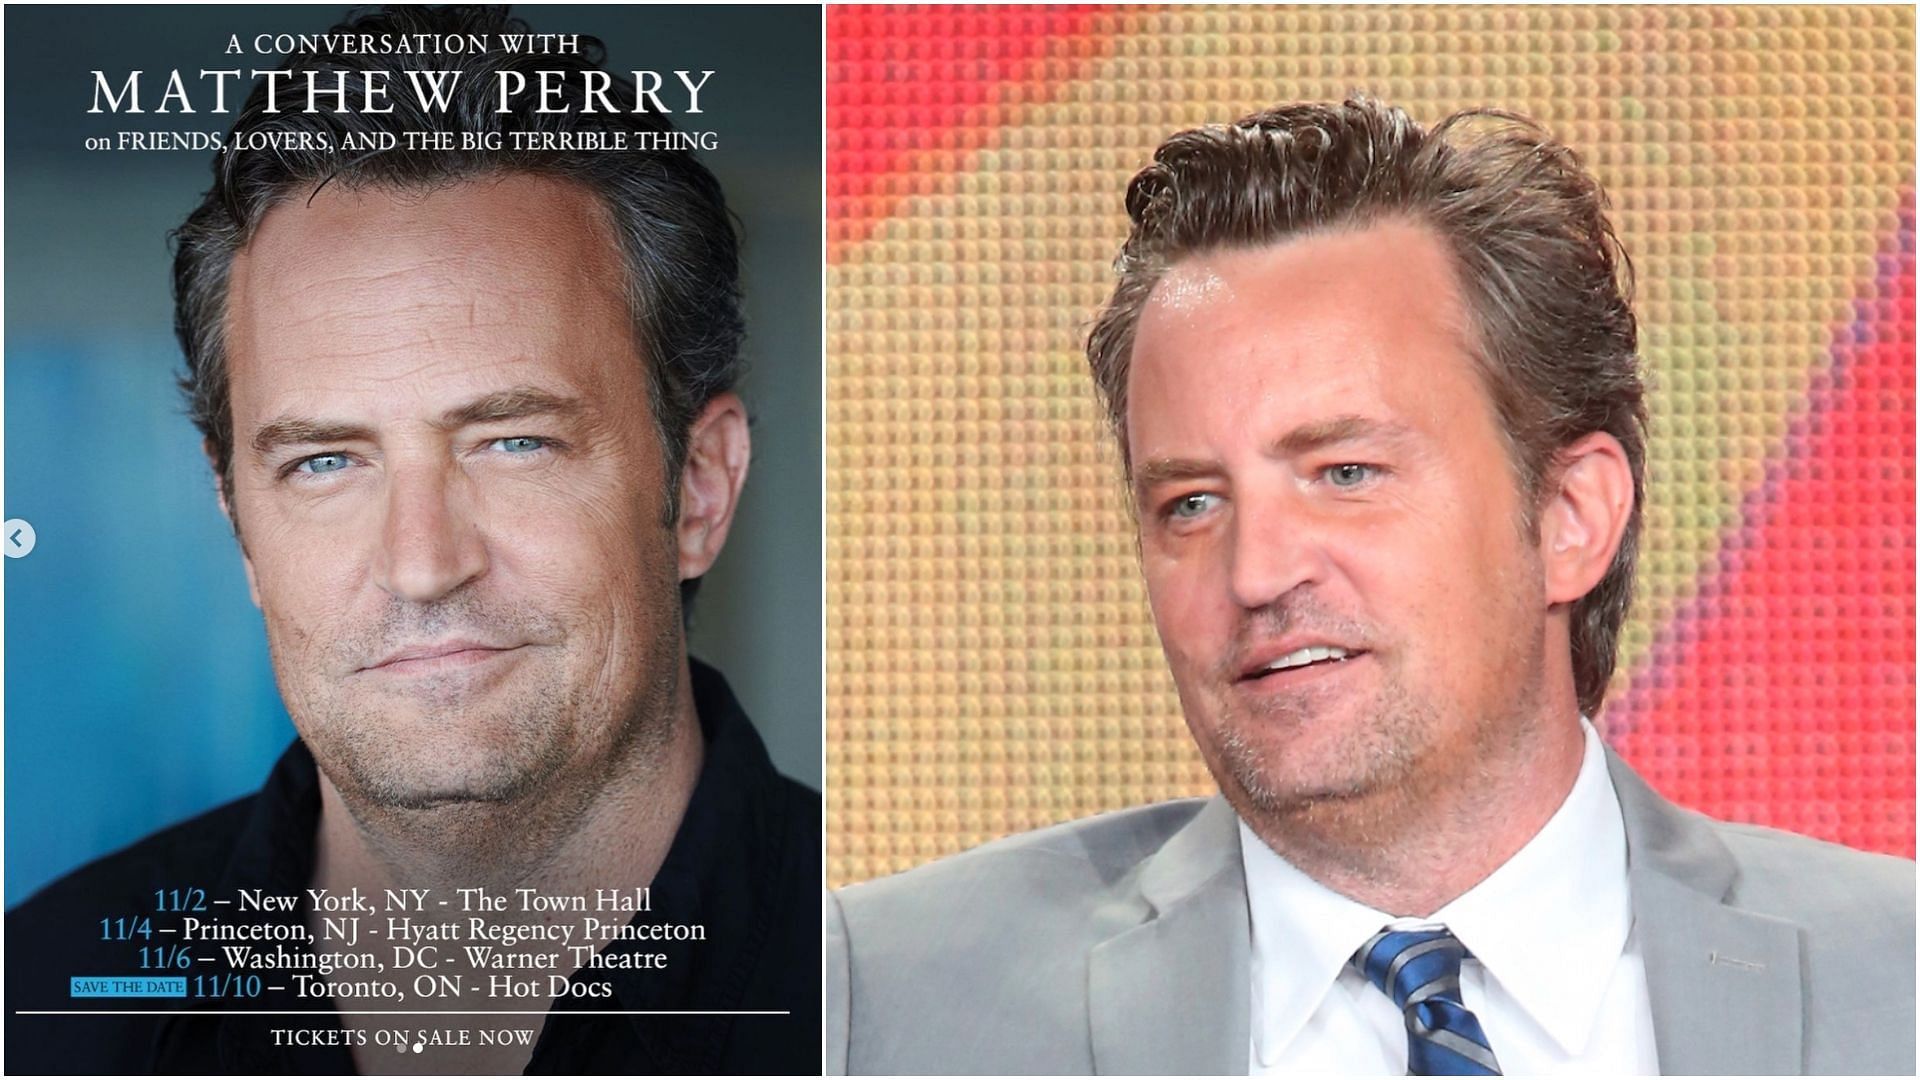 Matthew Perry book tour Tickets, where to buy, cities, dates and more